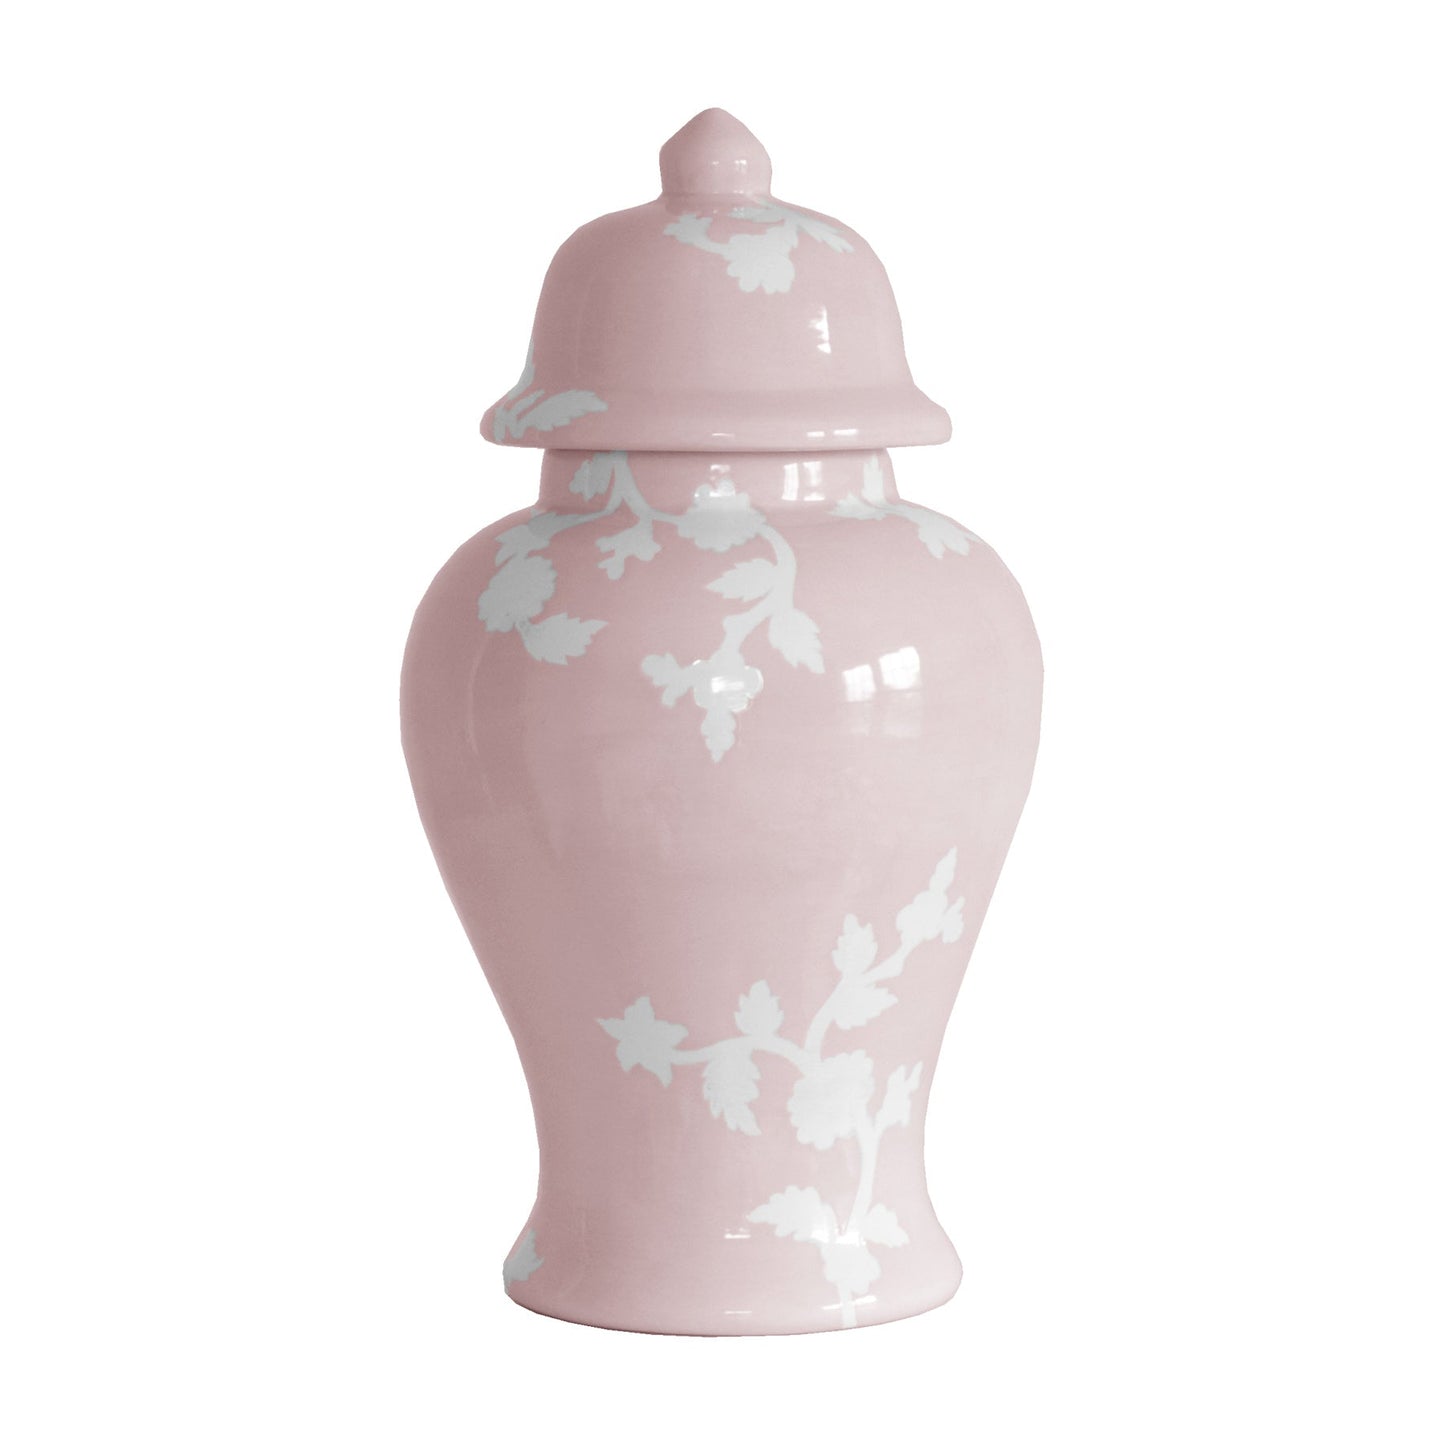 Chinoiserie Dreams Ginger Jars in Cherry Blossom Pink | Wholesale